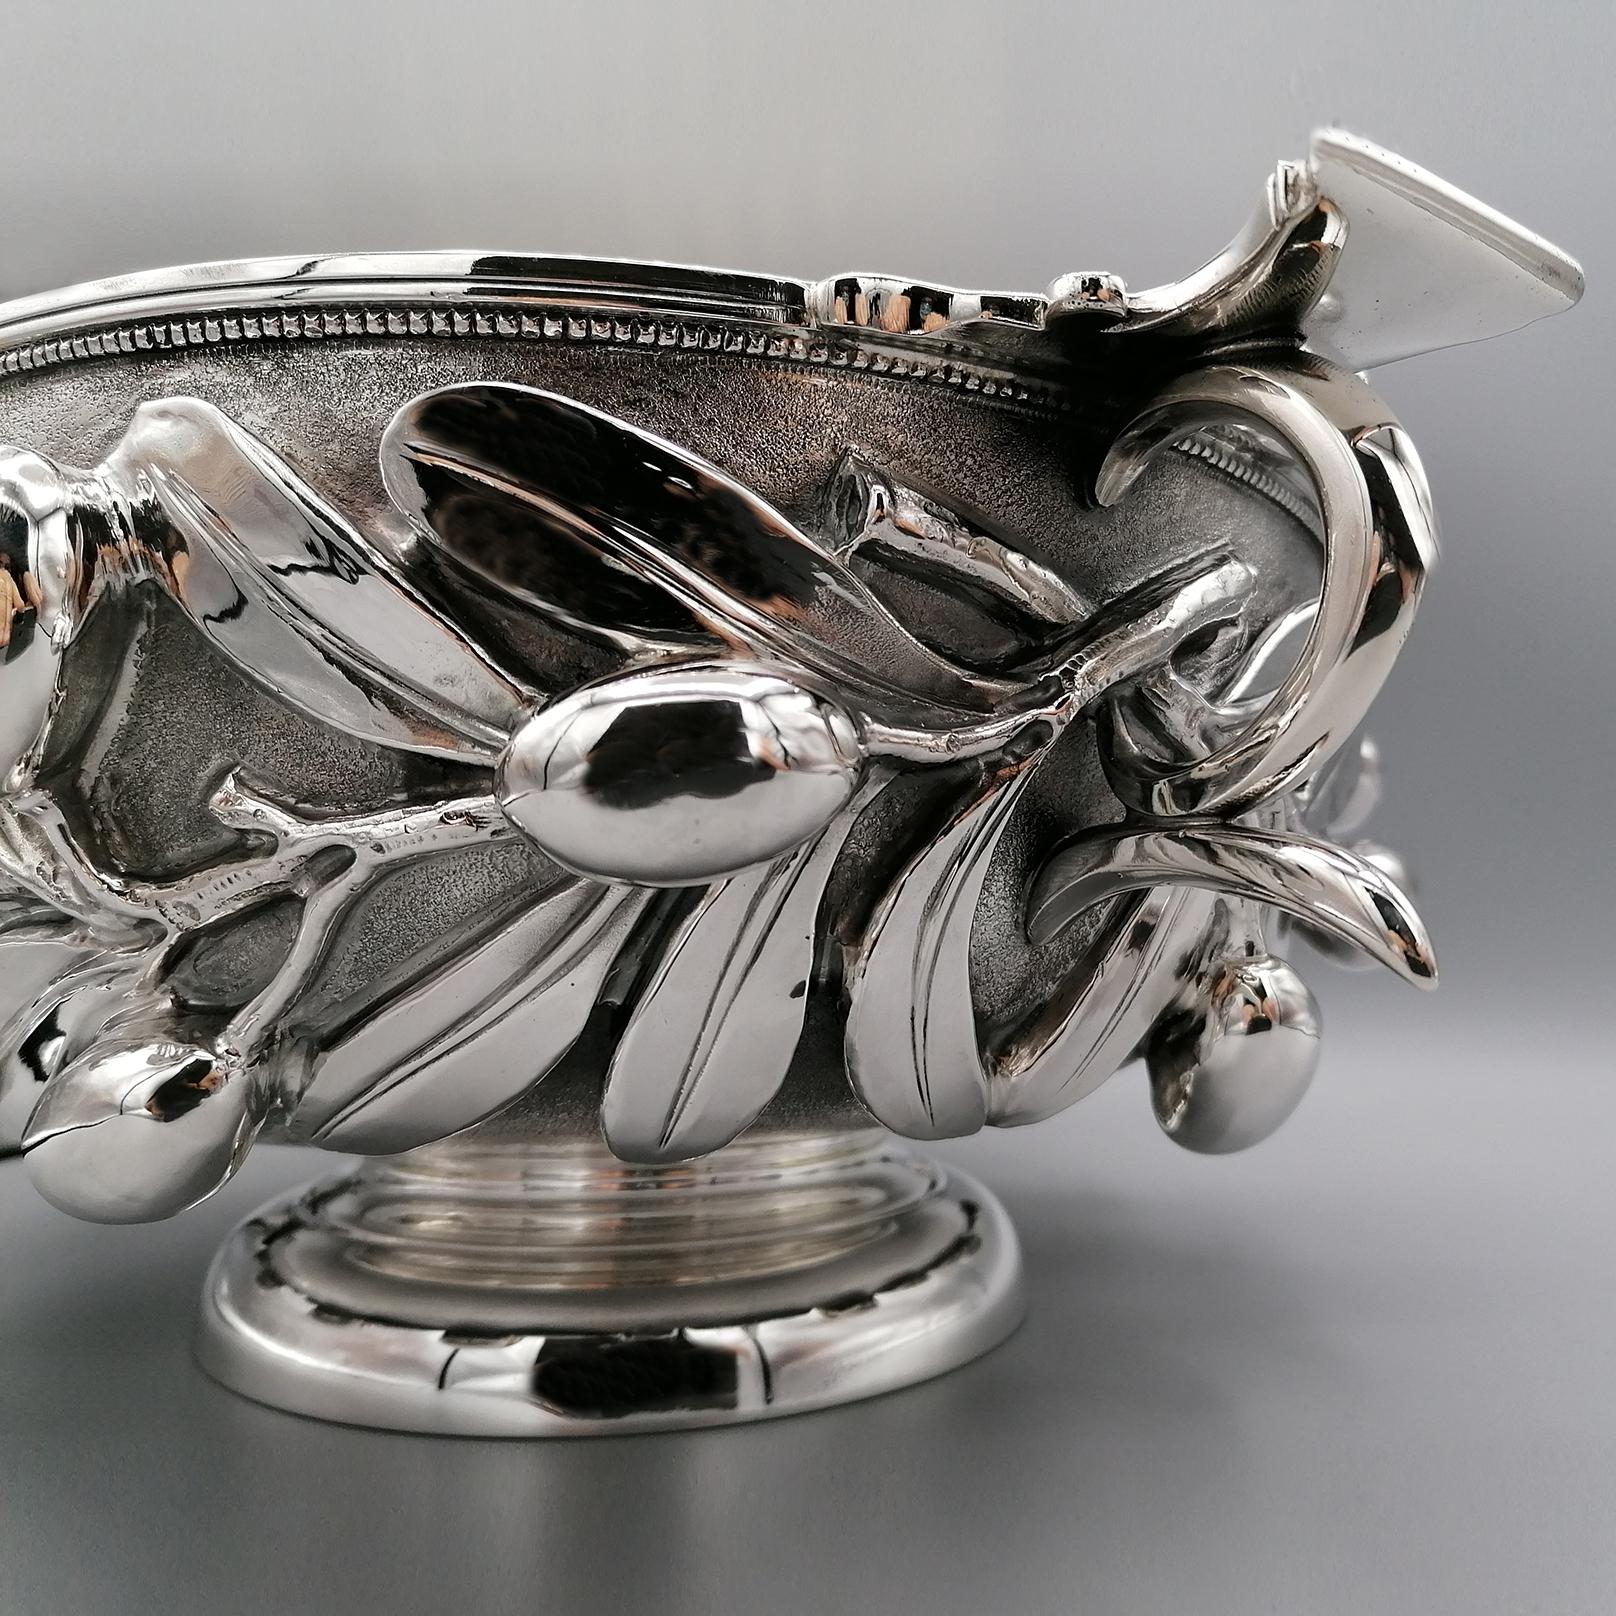 20th Century Italian Sterling Silver Bowl with Handles, Roman Replica For Sale 7